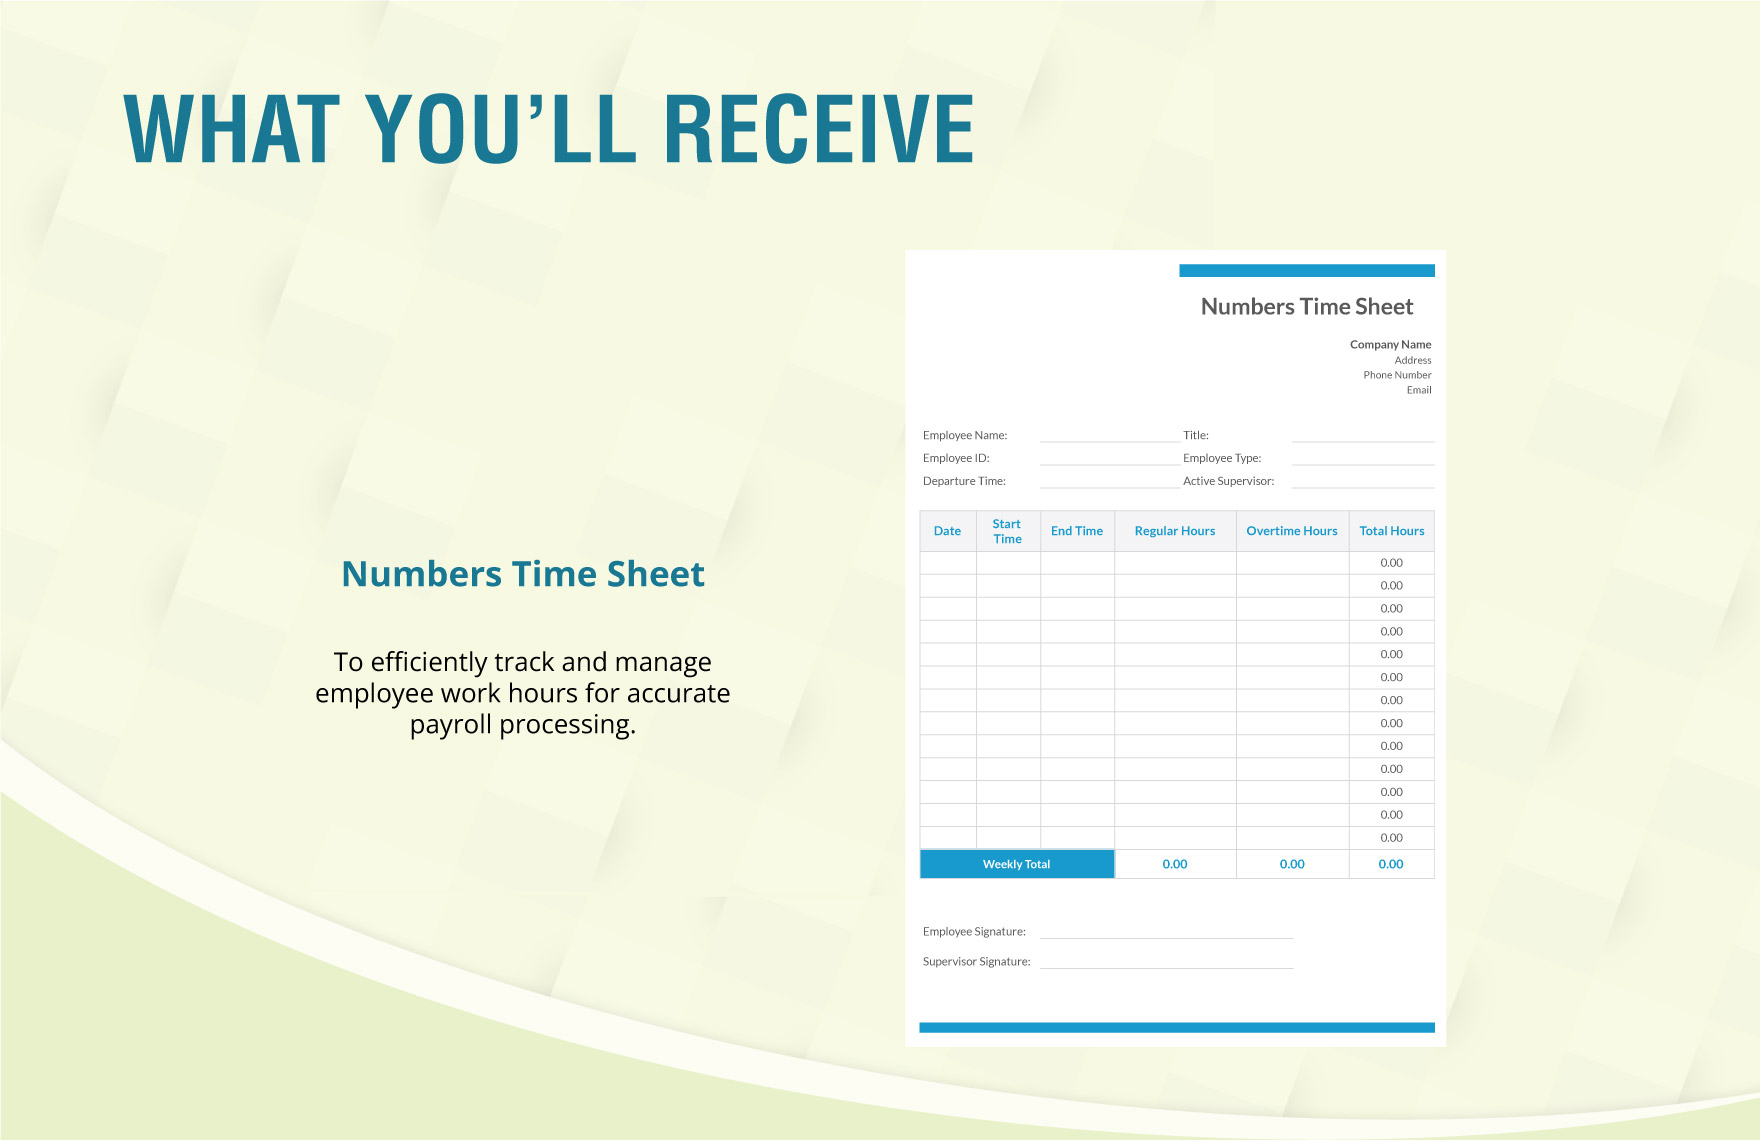 Numbers Time Sheet Template